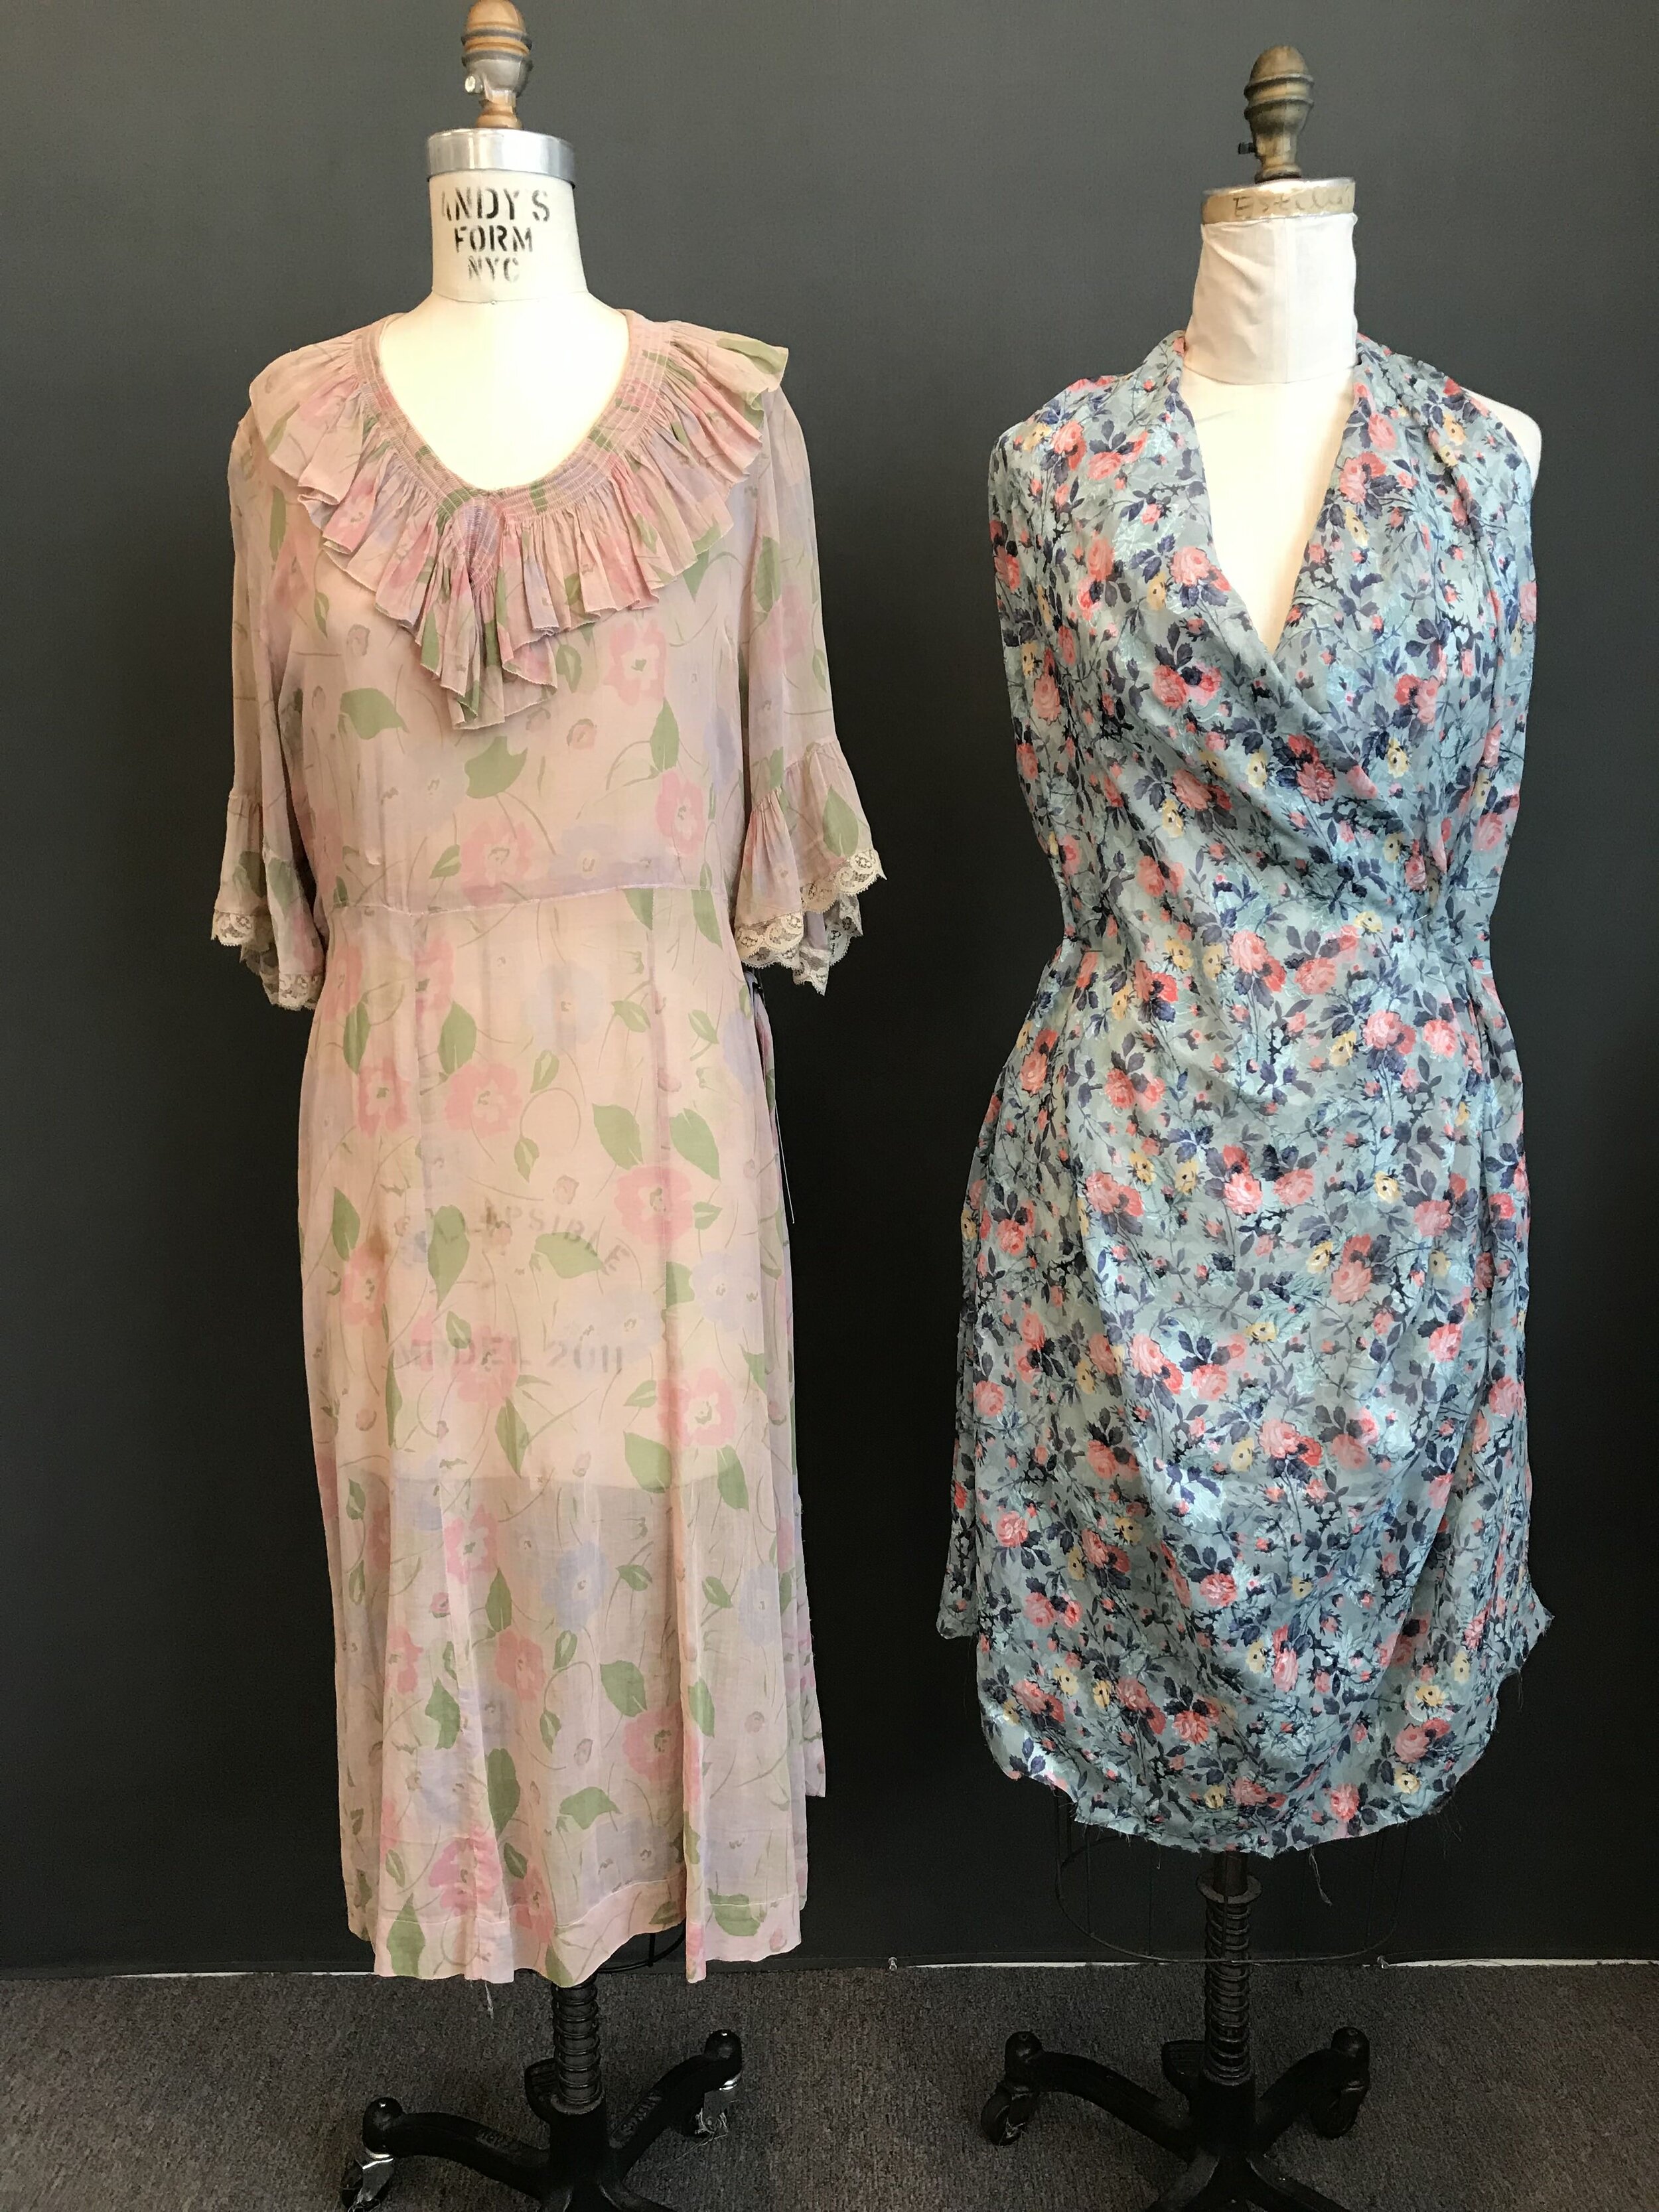 "Mindy" wedding dress.  Built using the pink vintage dress (left) as inspiration for the shape, remade using the blue fabric (right).